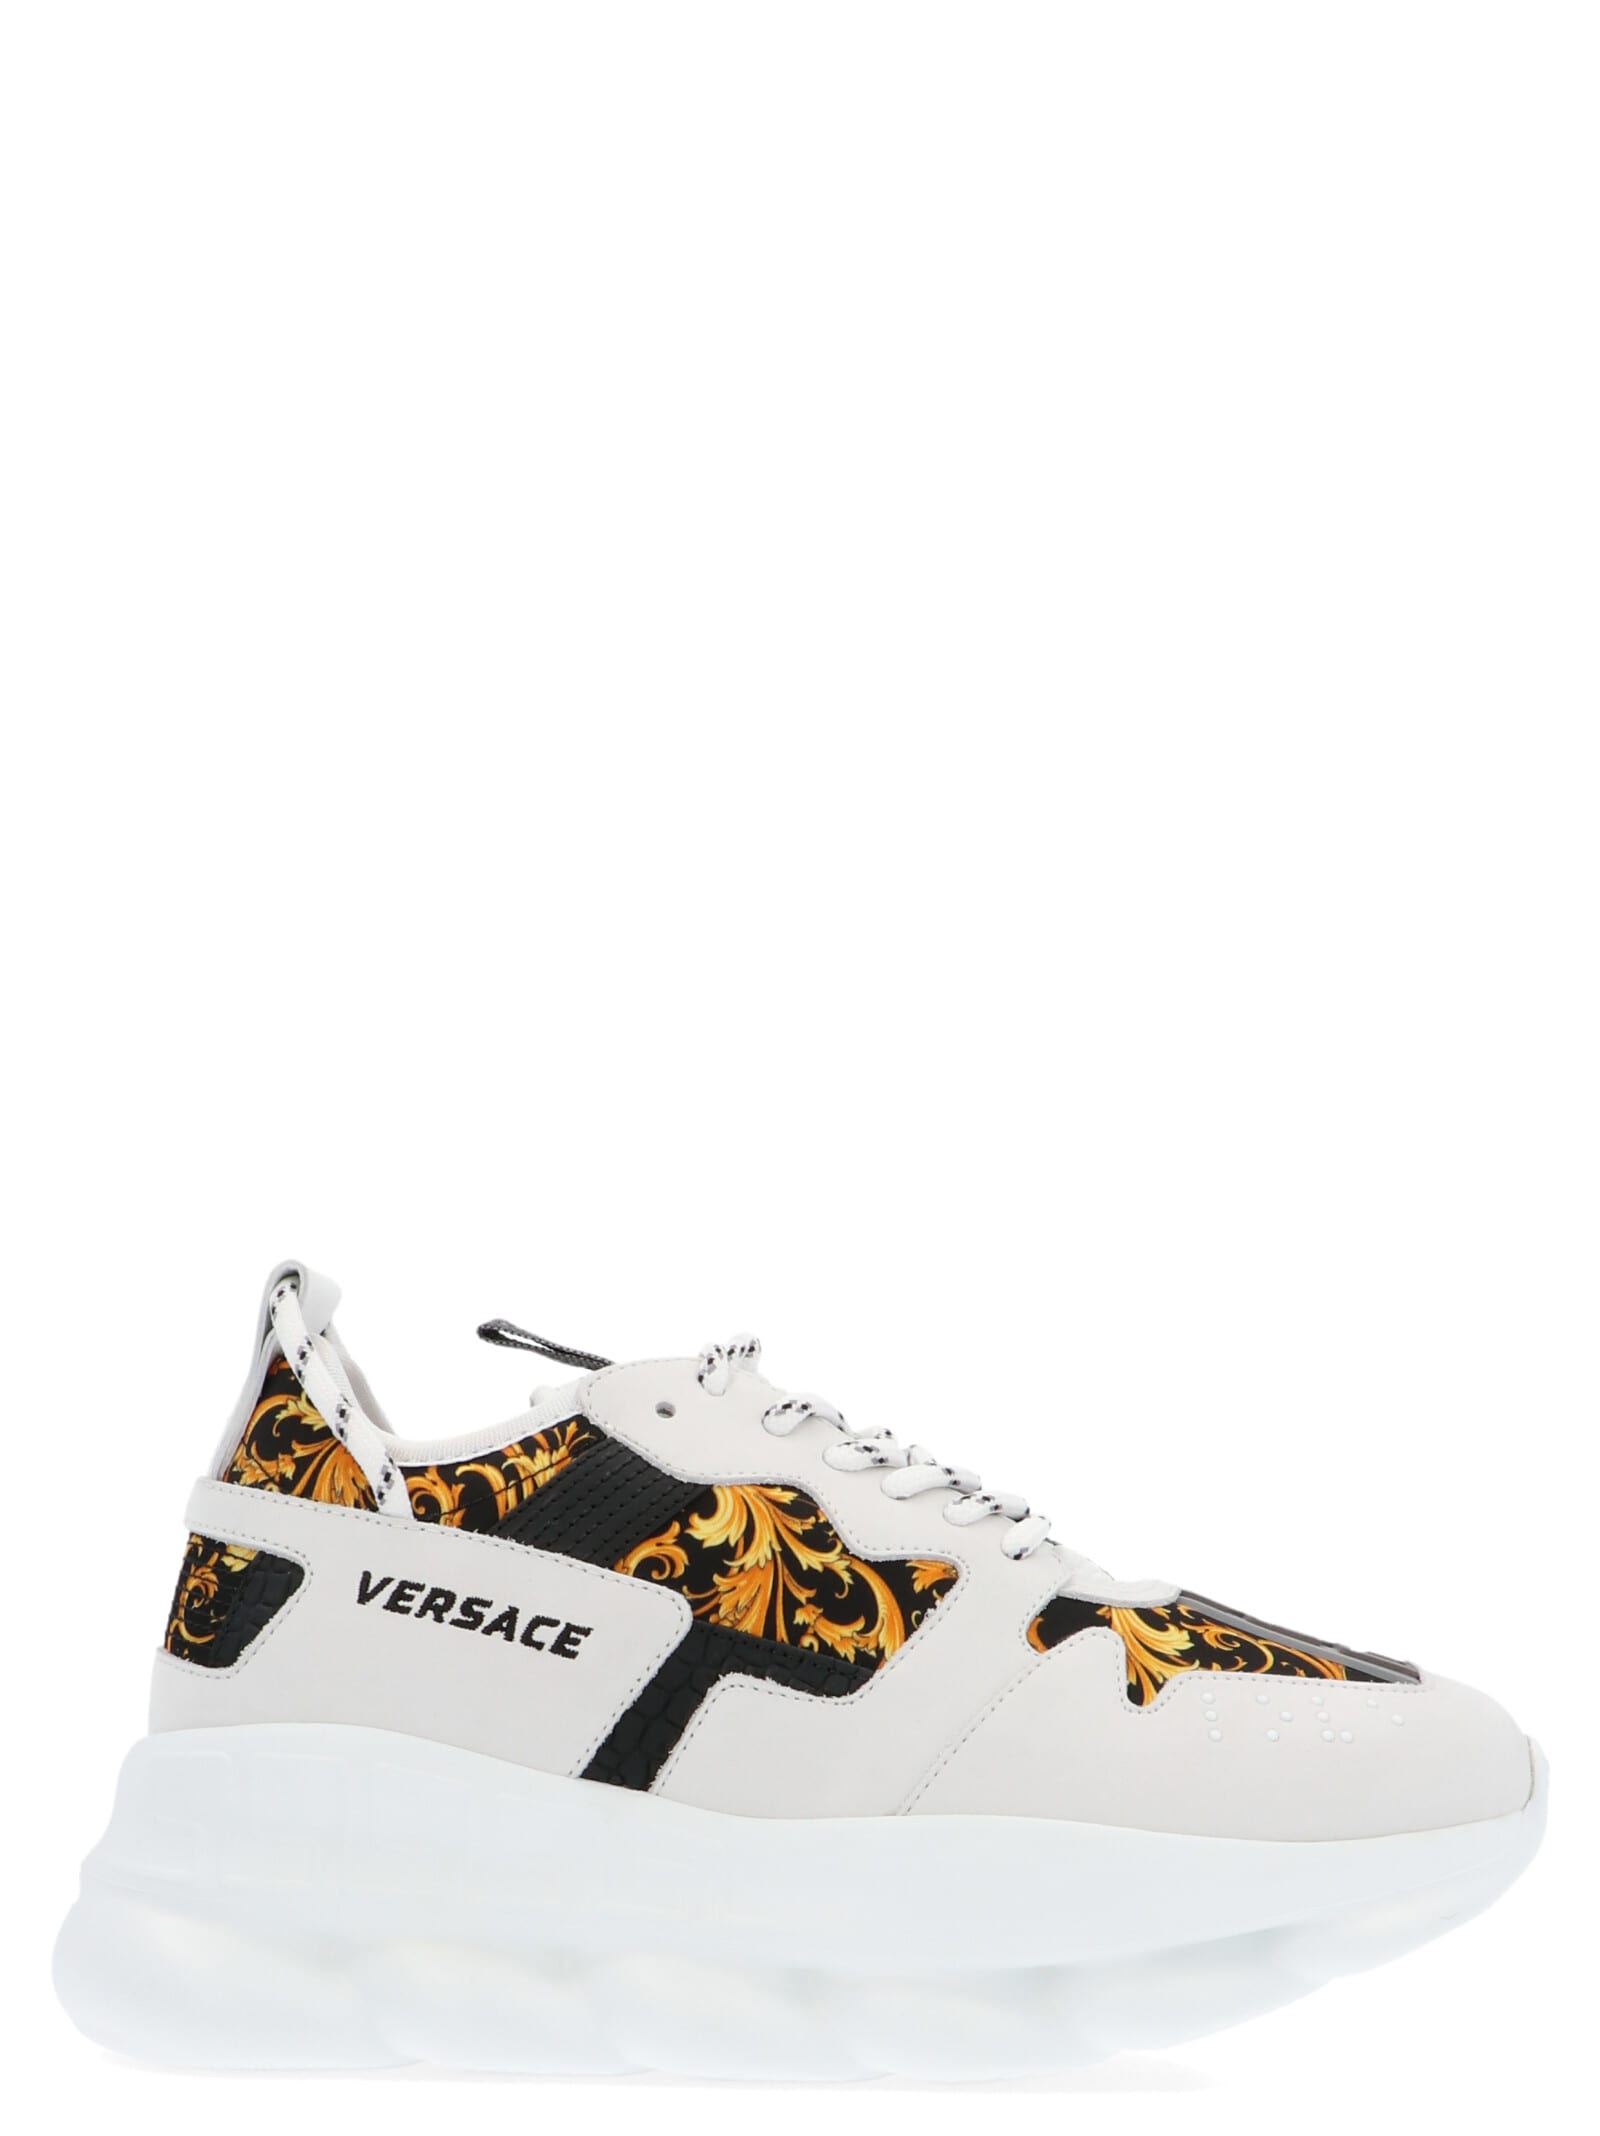 Versace chain Reaction Sneakers